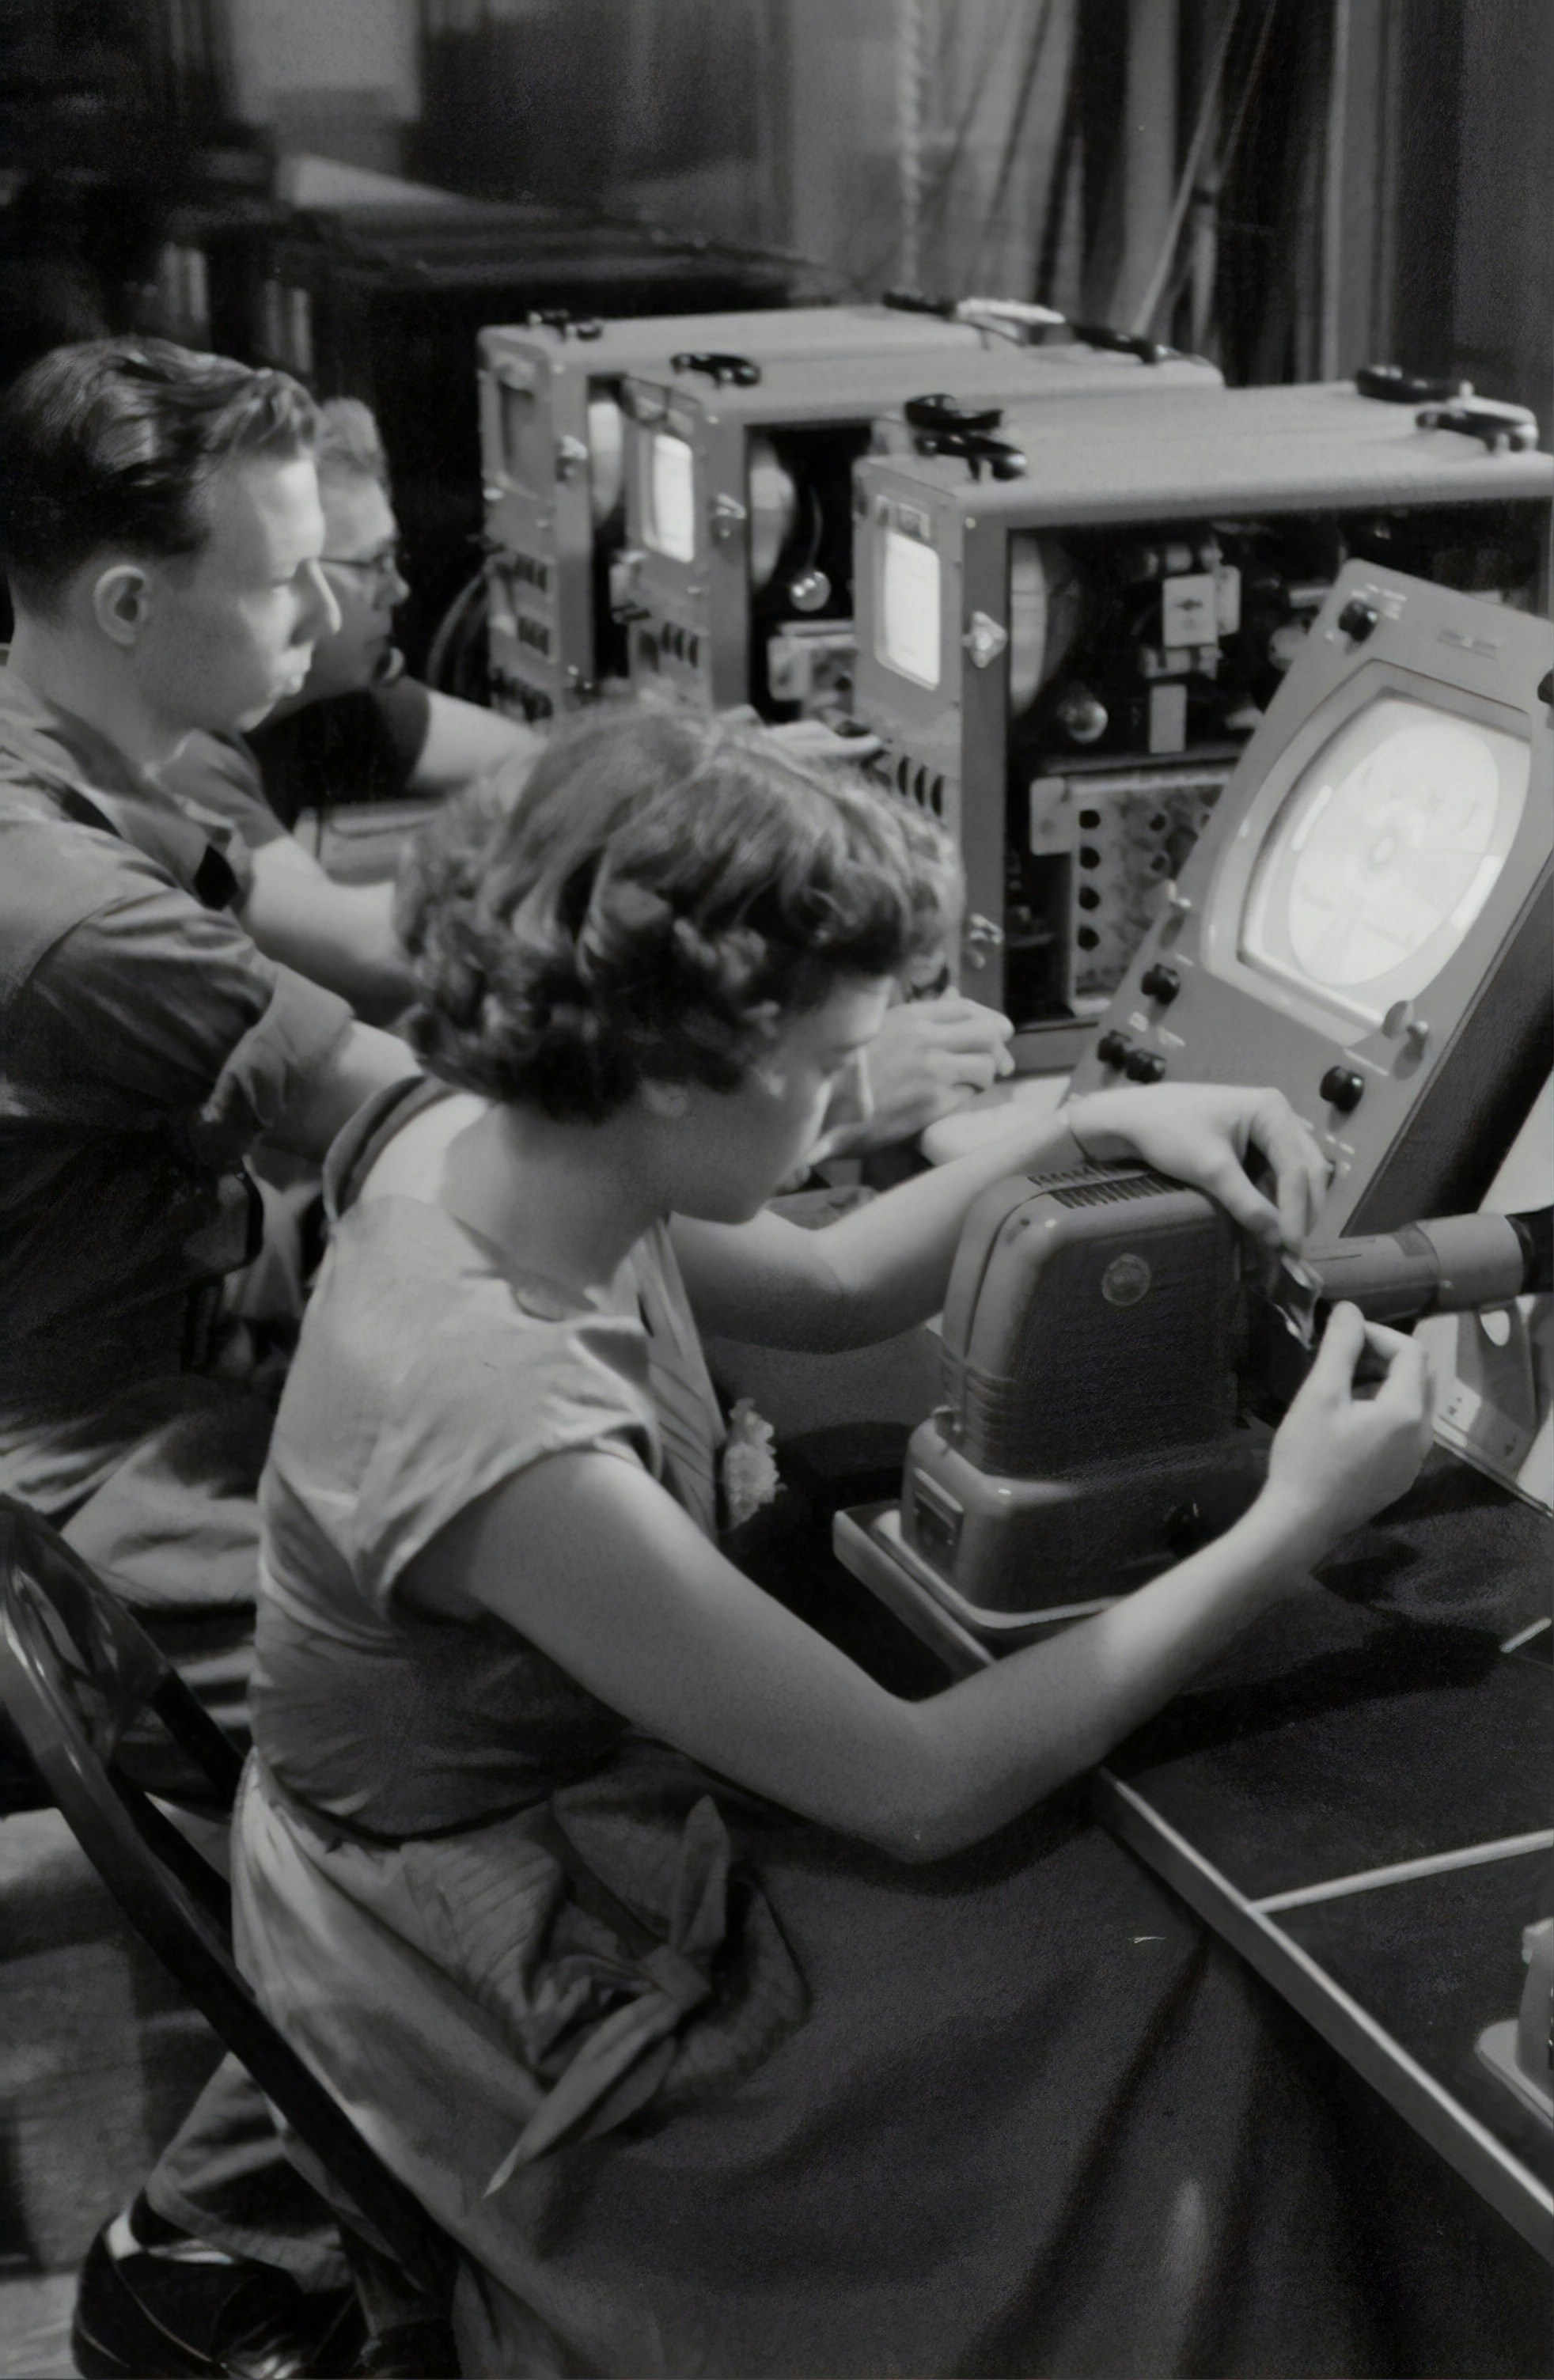 Students in front of screens, 1954